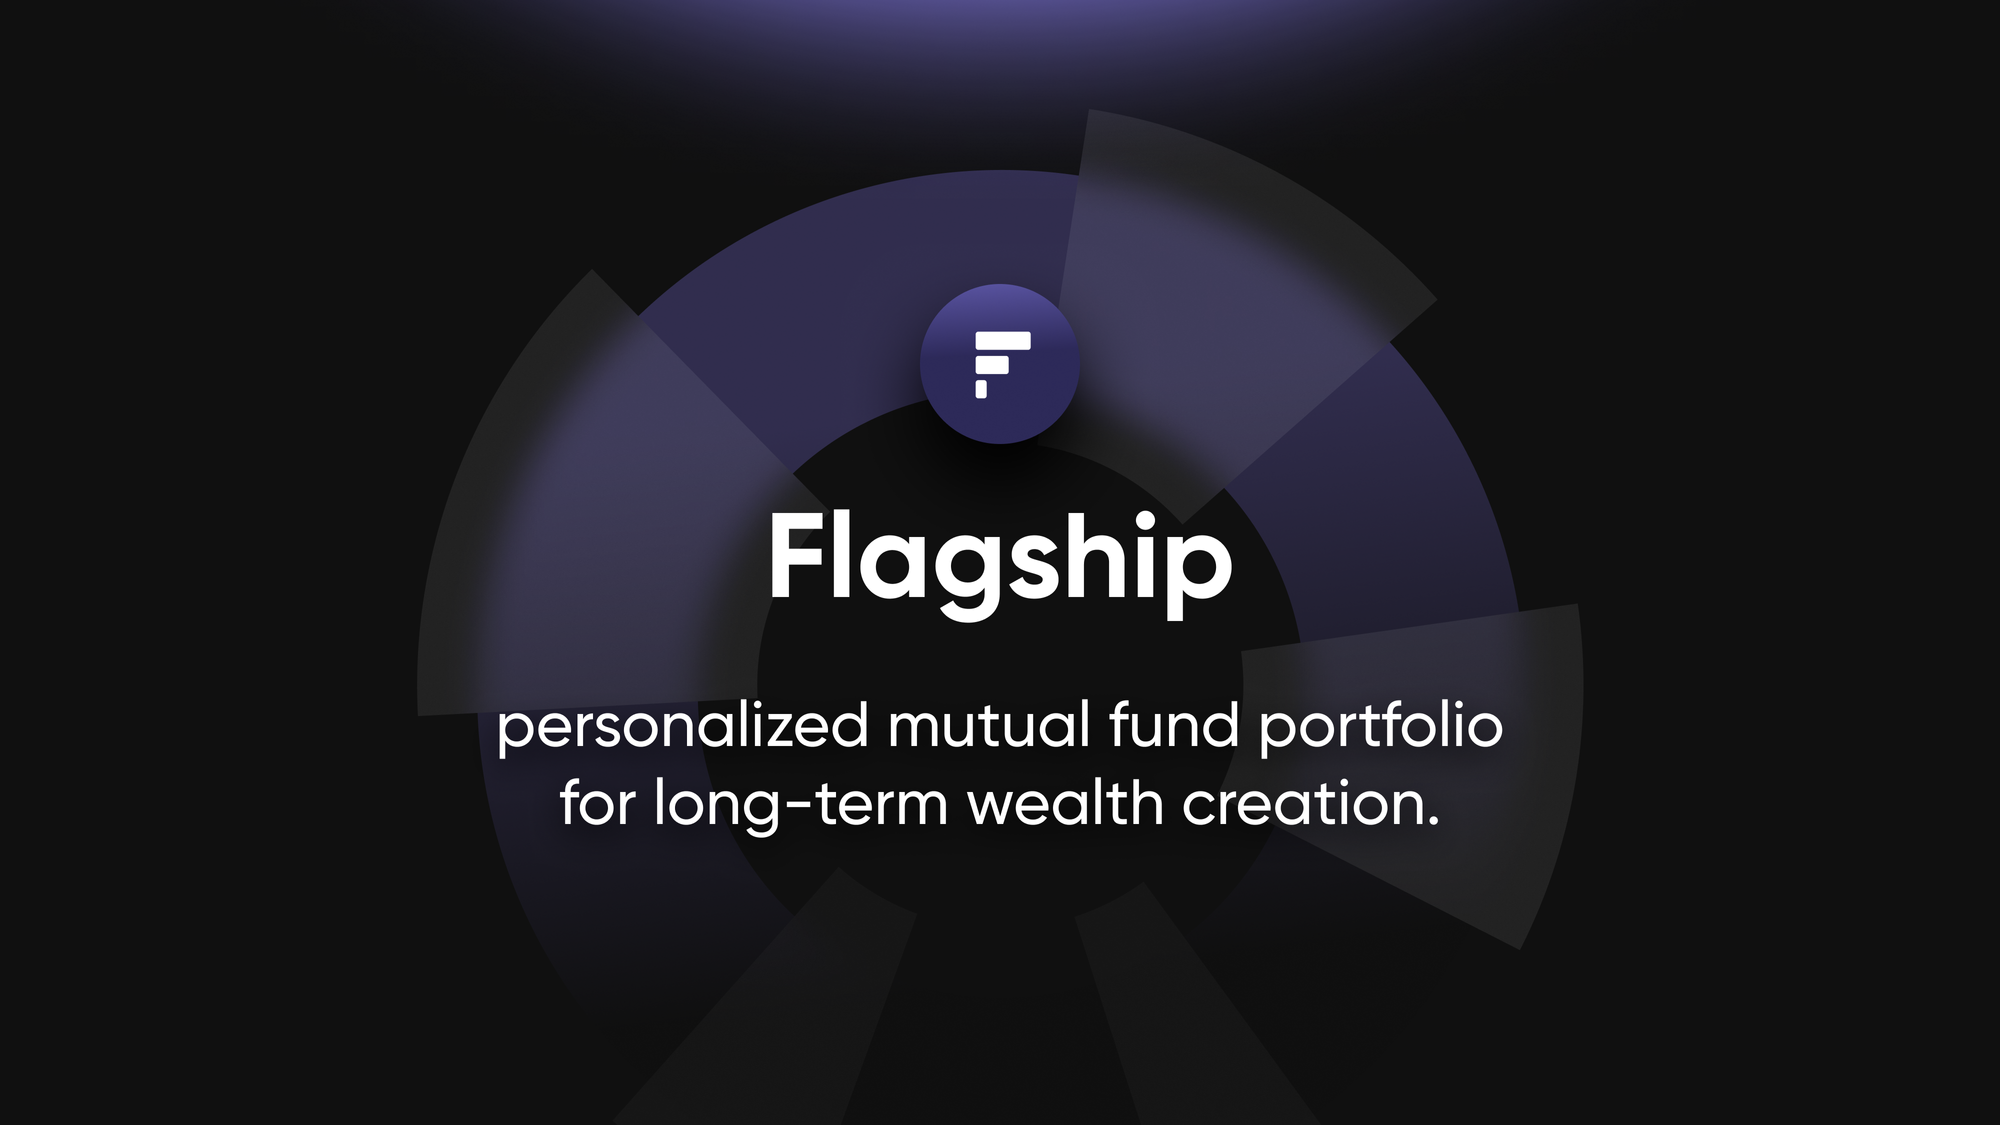 Flagship: A mutual fund portfolio tailored to your needs